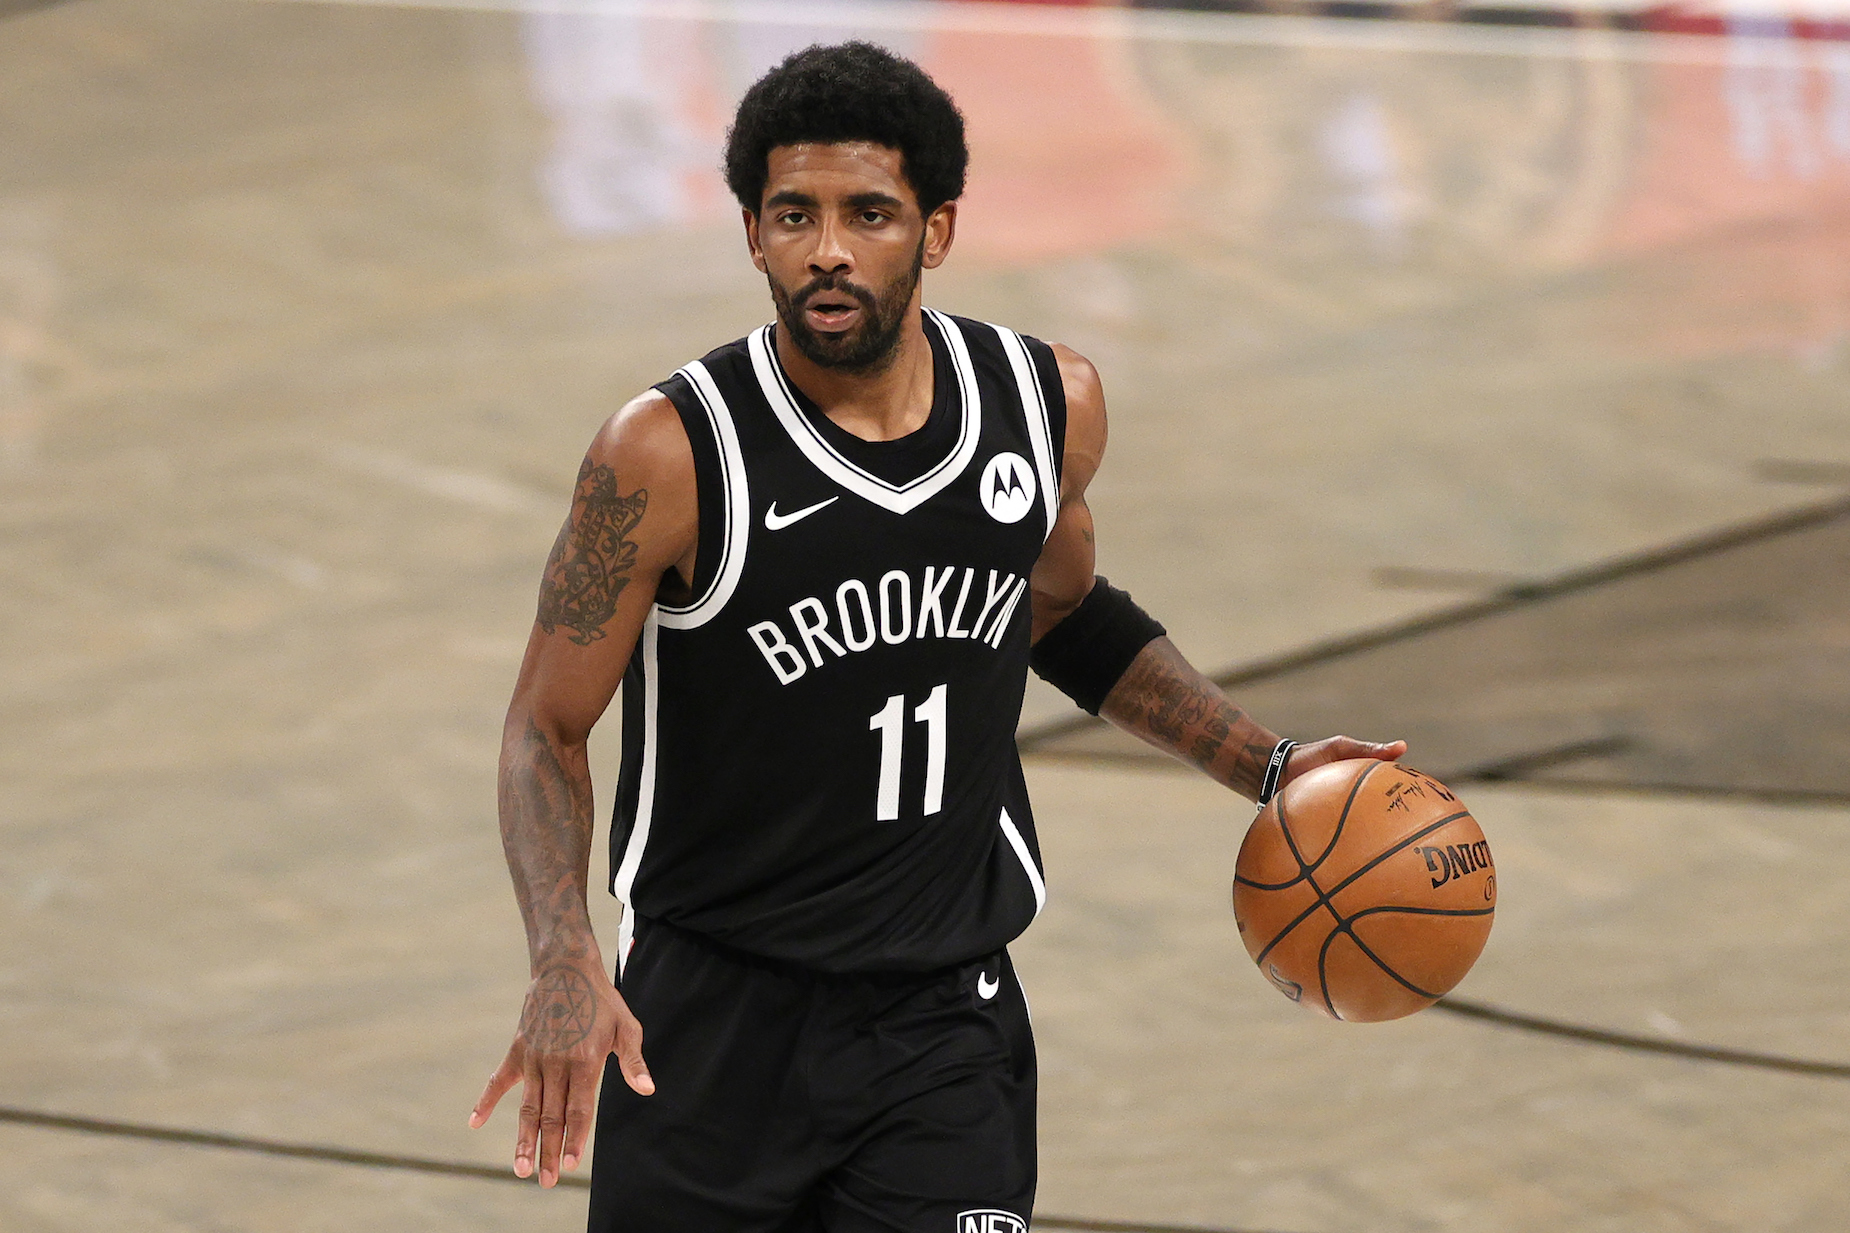 Brooklyn Nets guard Kyrie Irving dribbles the ball in April 2021.